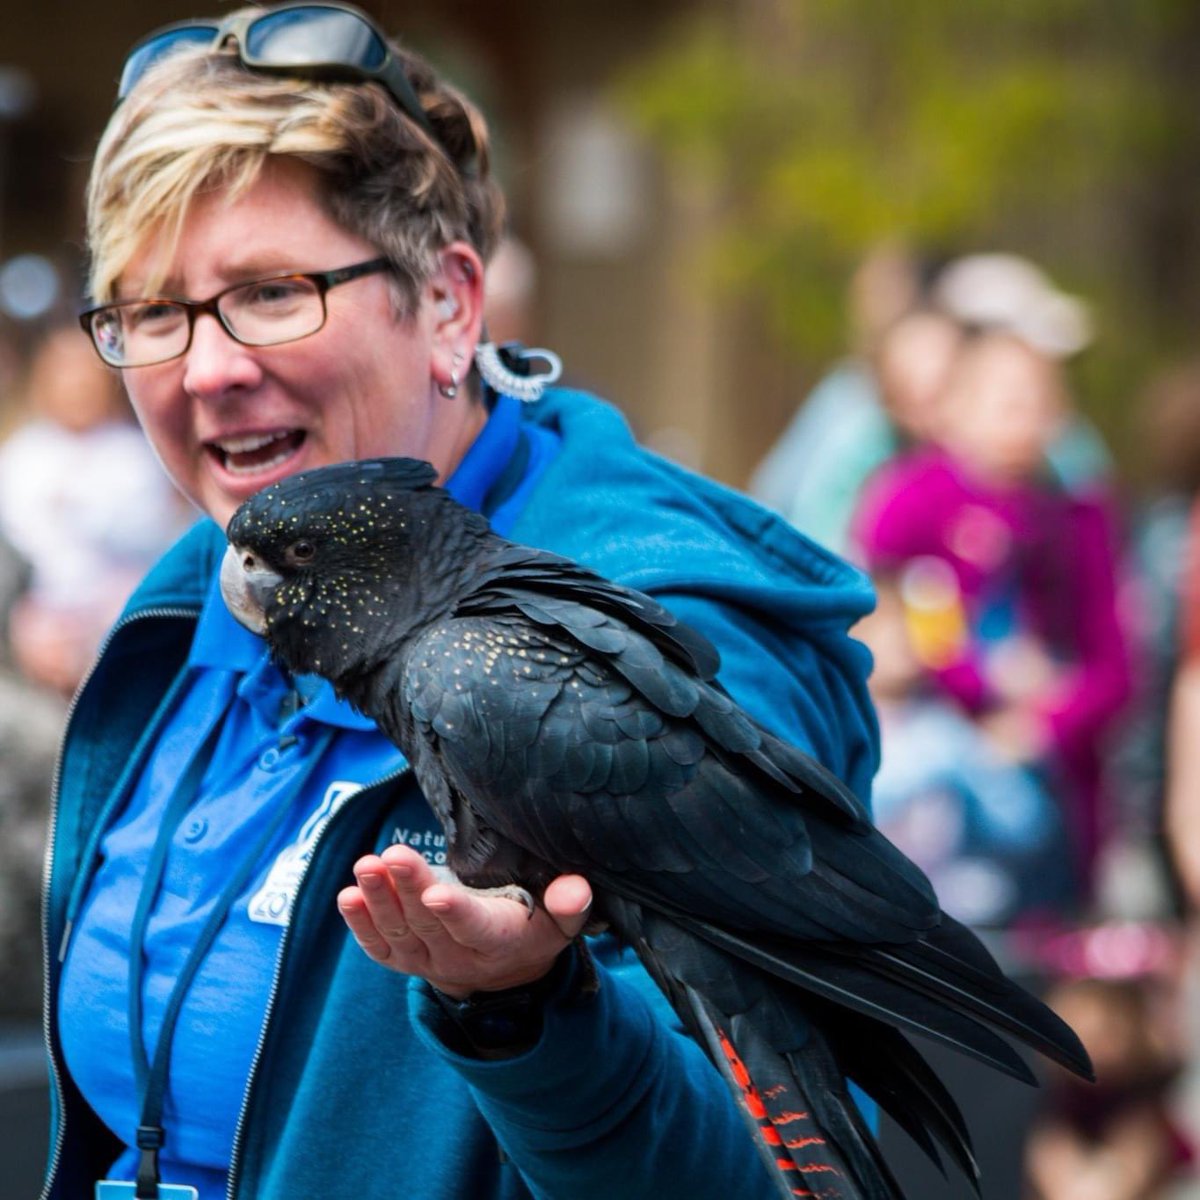 Want to hang out with some high-flying friends? Our daily Interactive Bird Shows presented by BankRI are back! 👏🏽 Shows run daily at 11 AM and 2 PM (weather permitting).